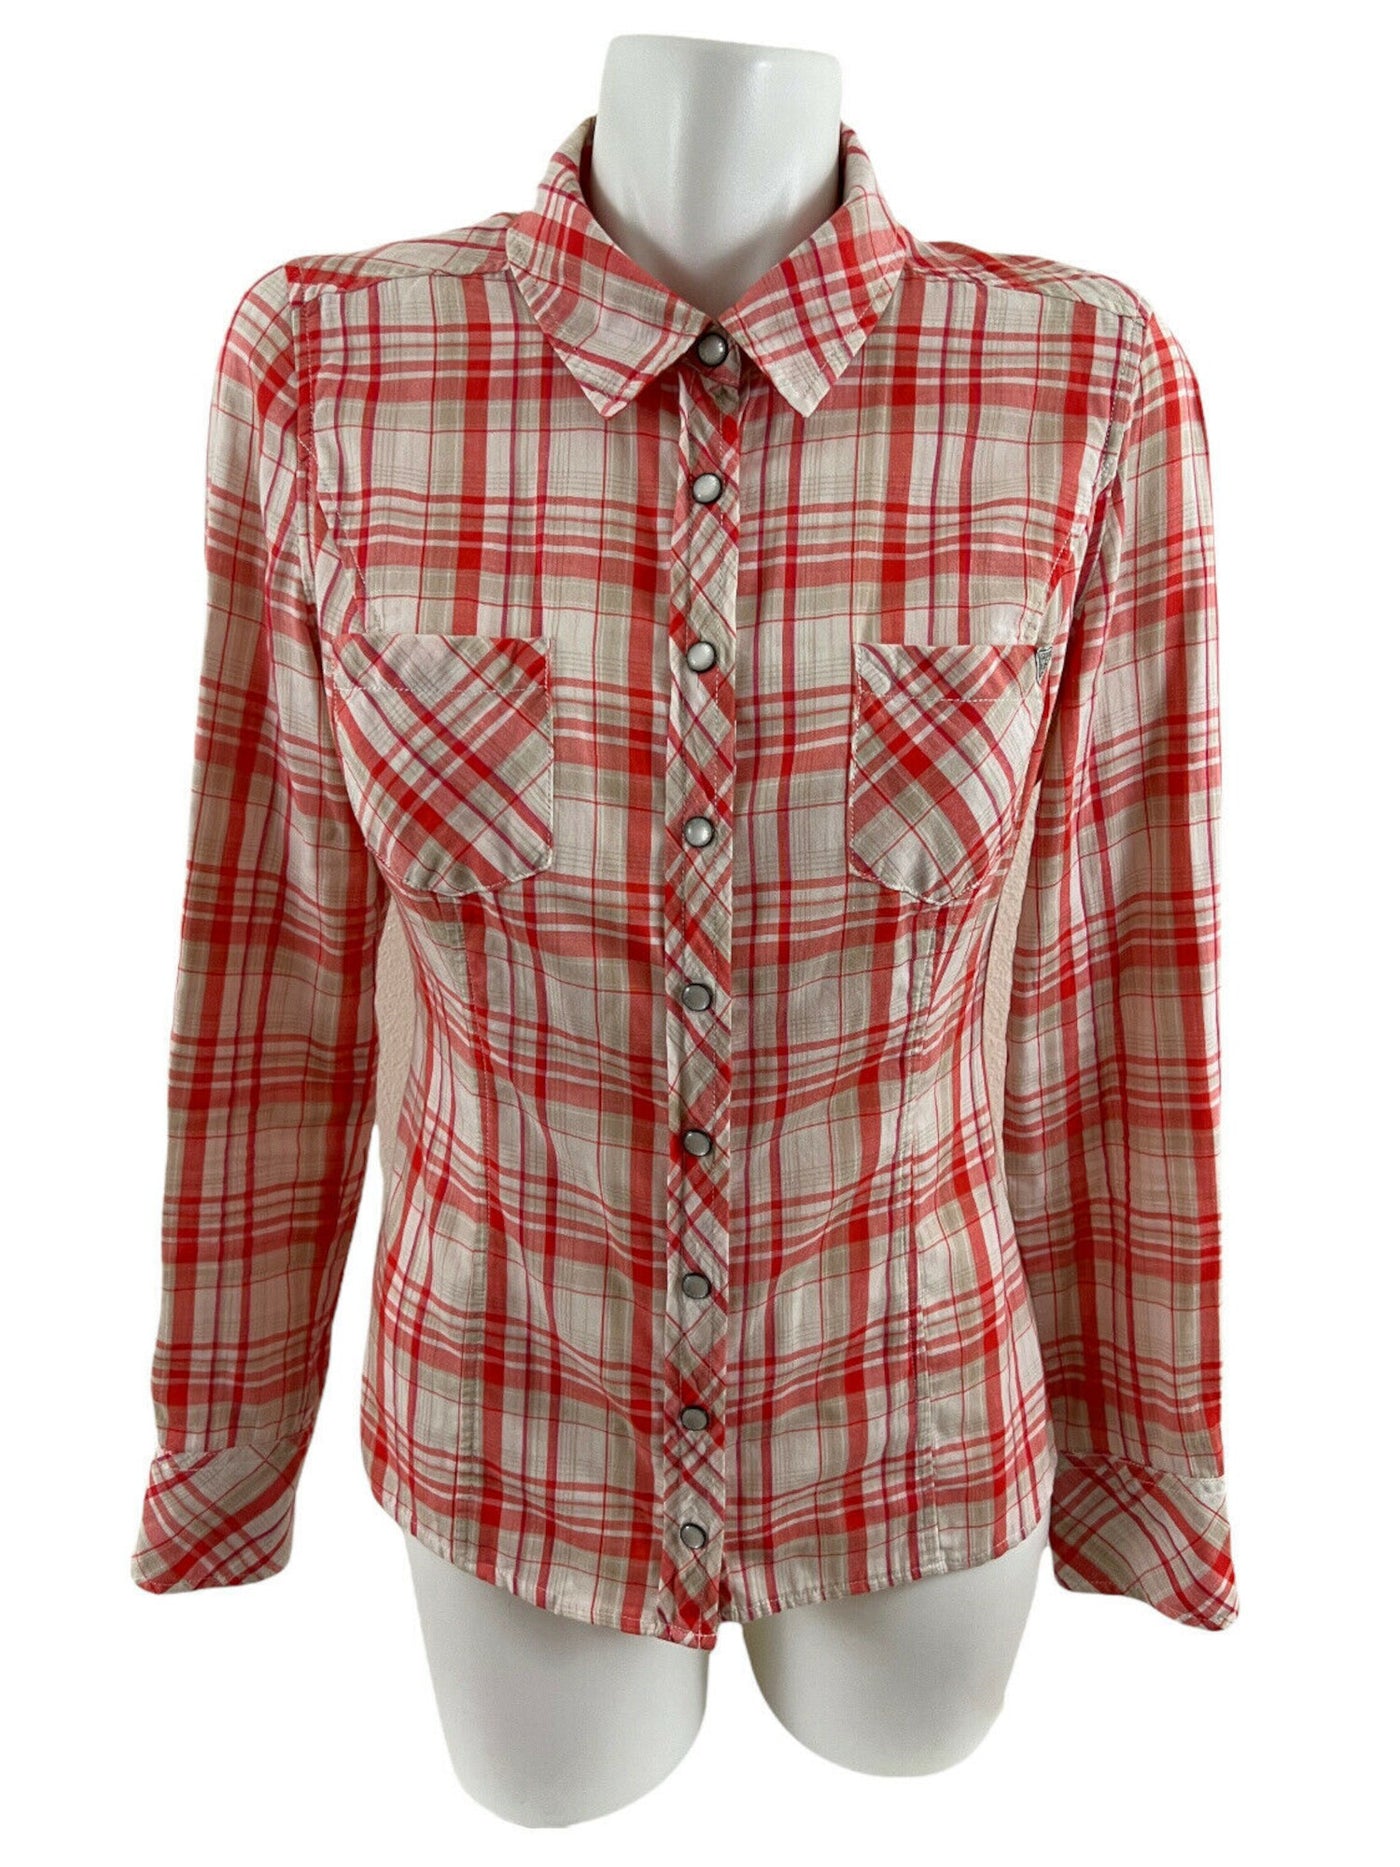 GUESS Womens Coral Vintage Look Plaid Collared Button Up Top S